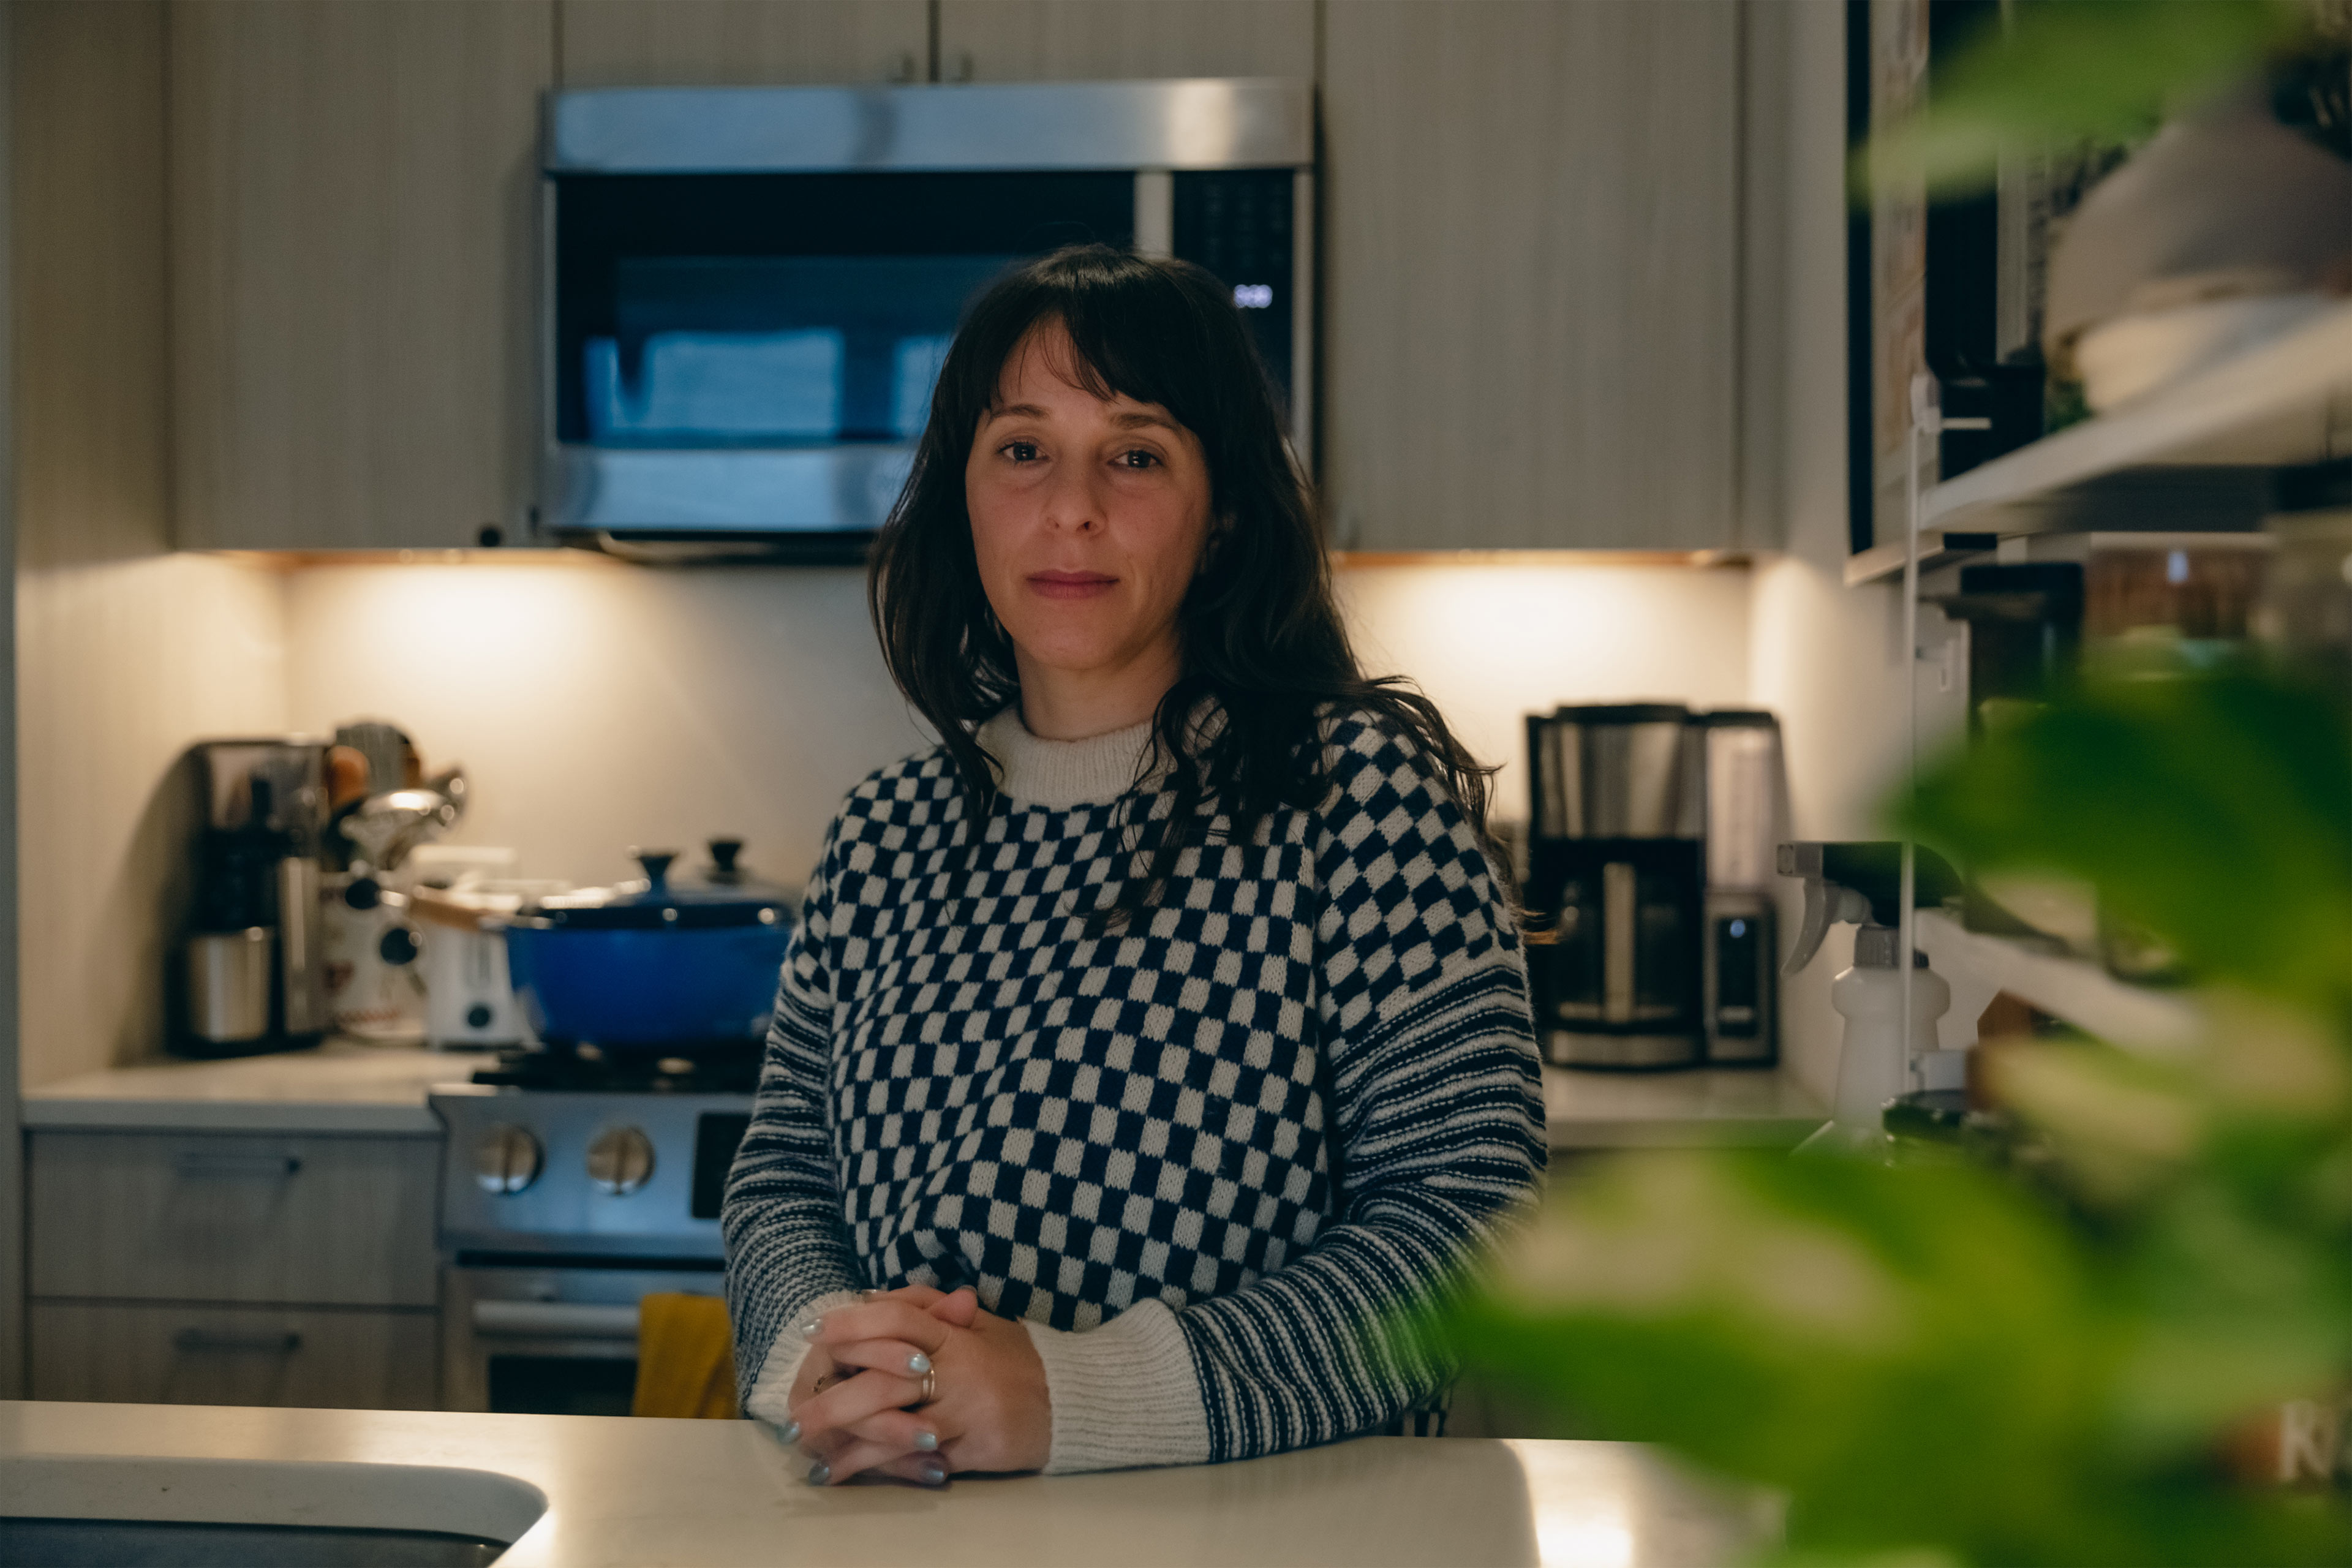 A portrait of a woman indoors in her kitchen.